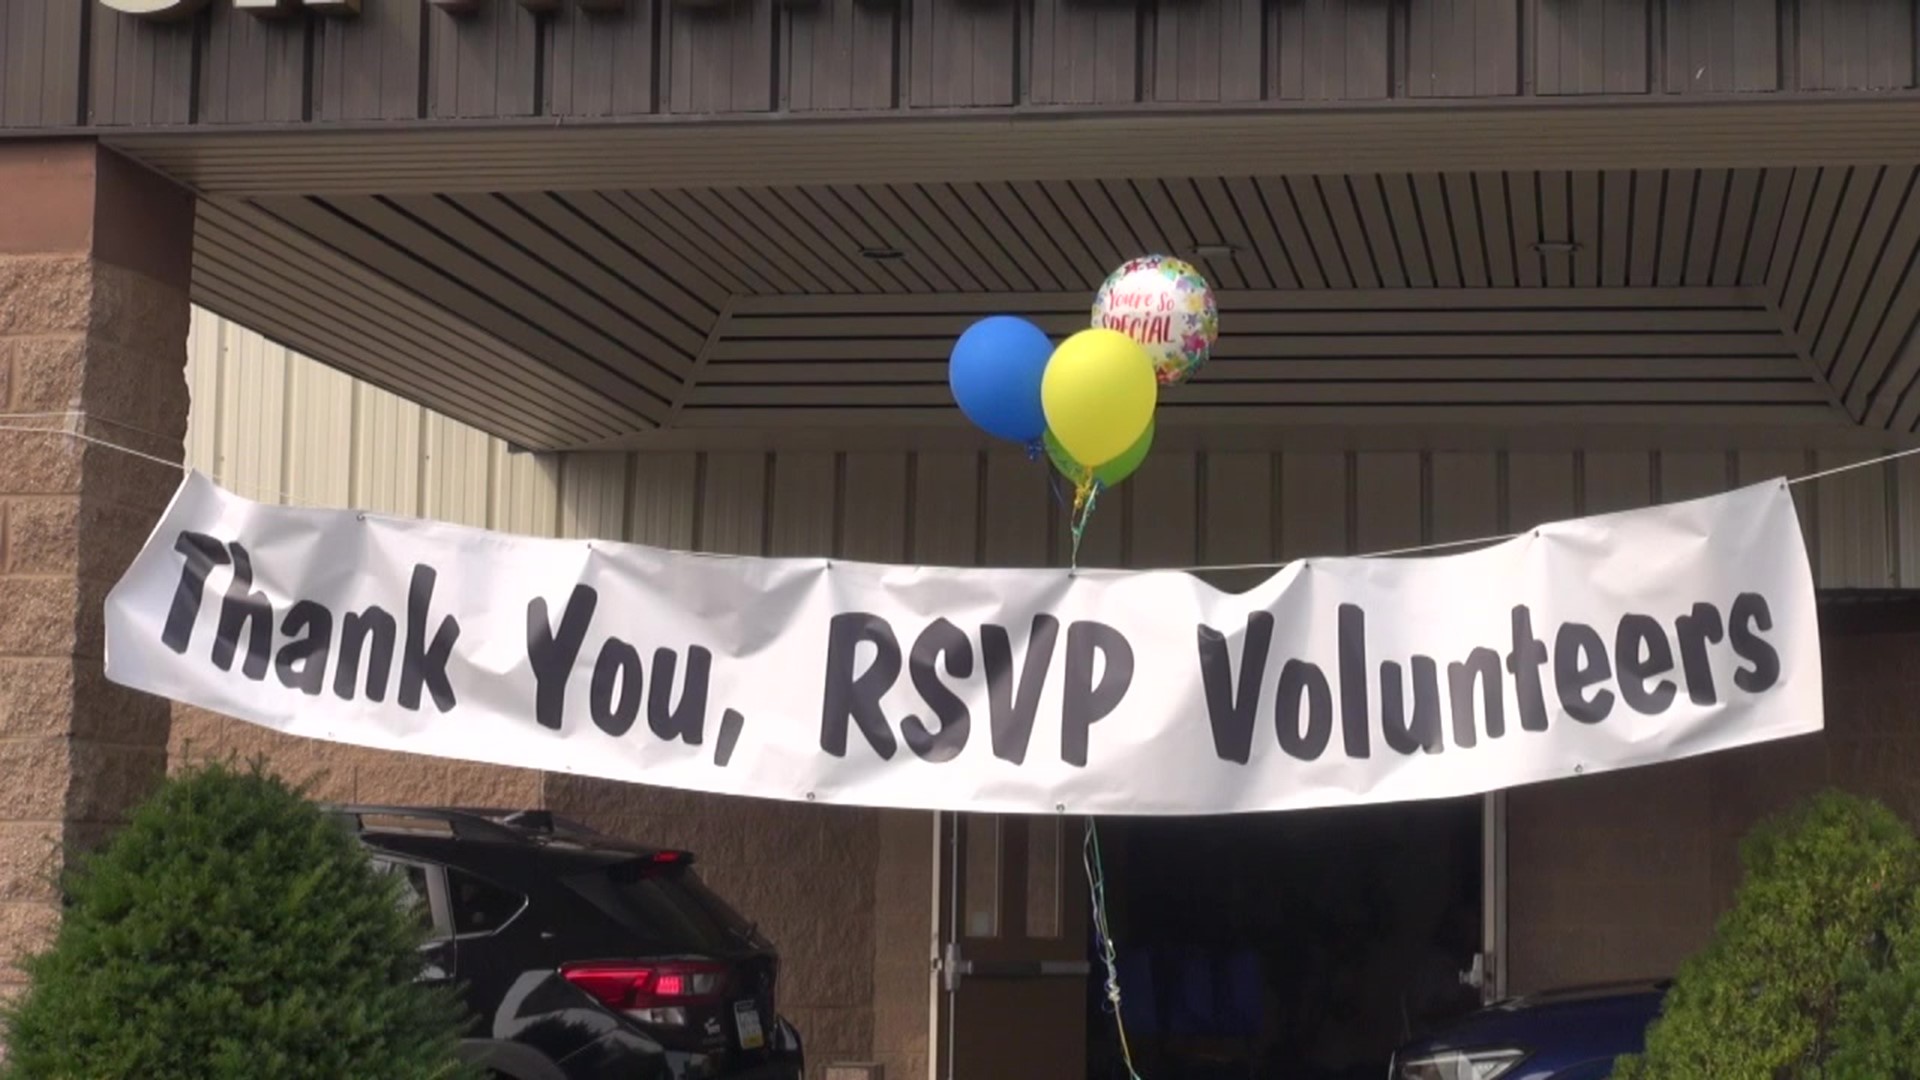 RSVP is a program that gives senior citizens the chance to volunteer after they retire, and every year the program hosts a recognition event to thank them.